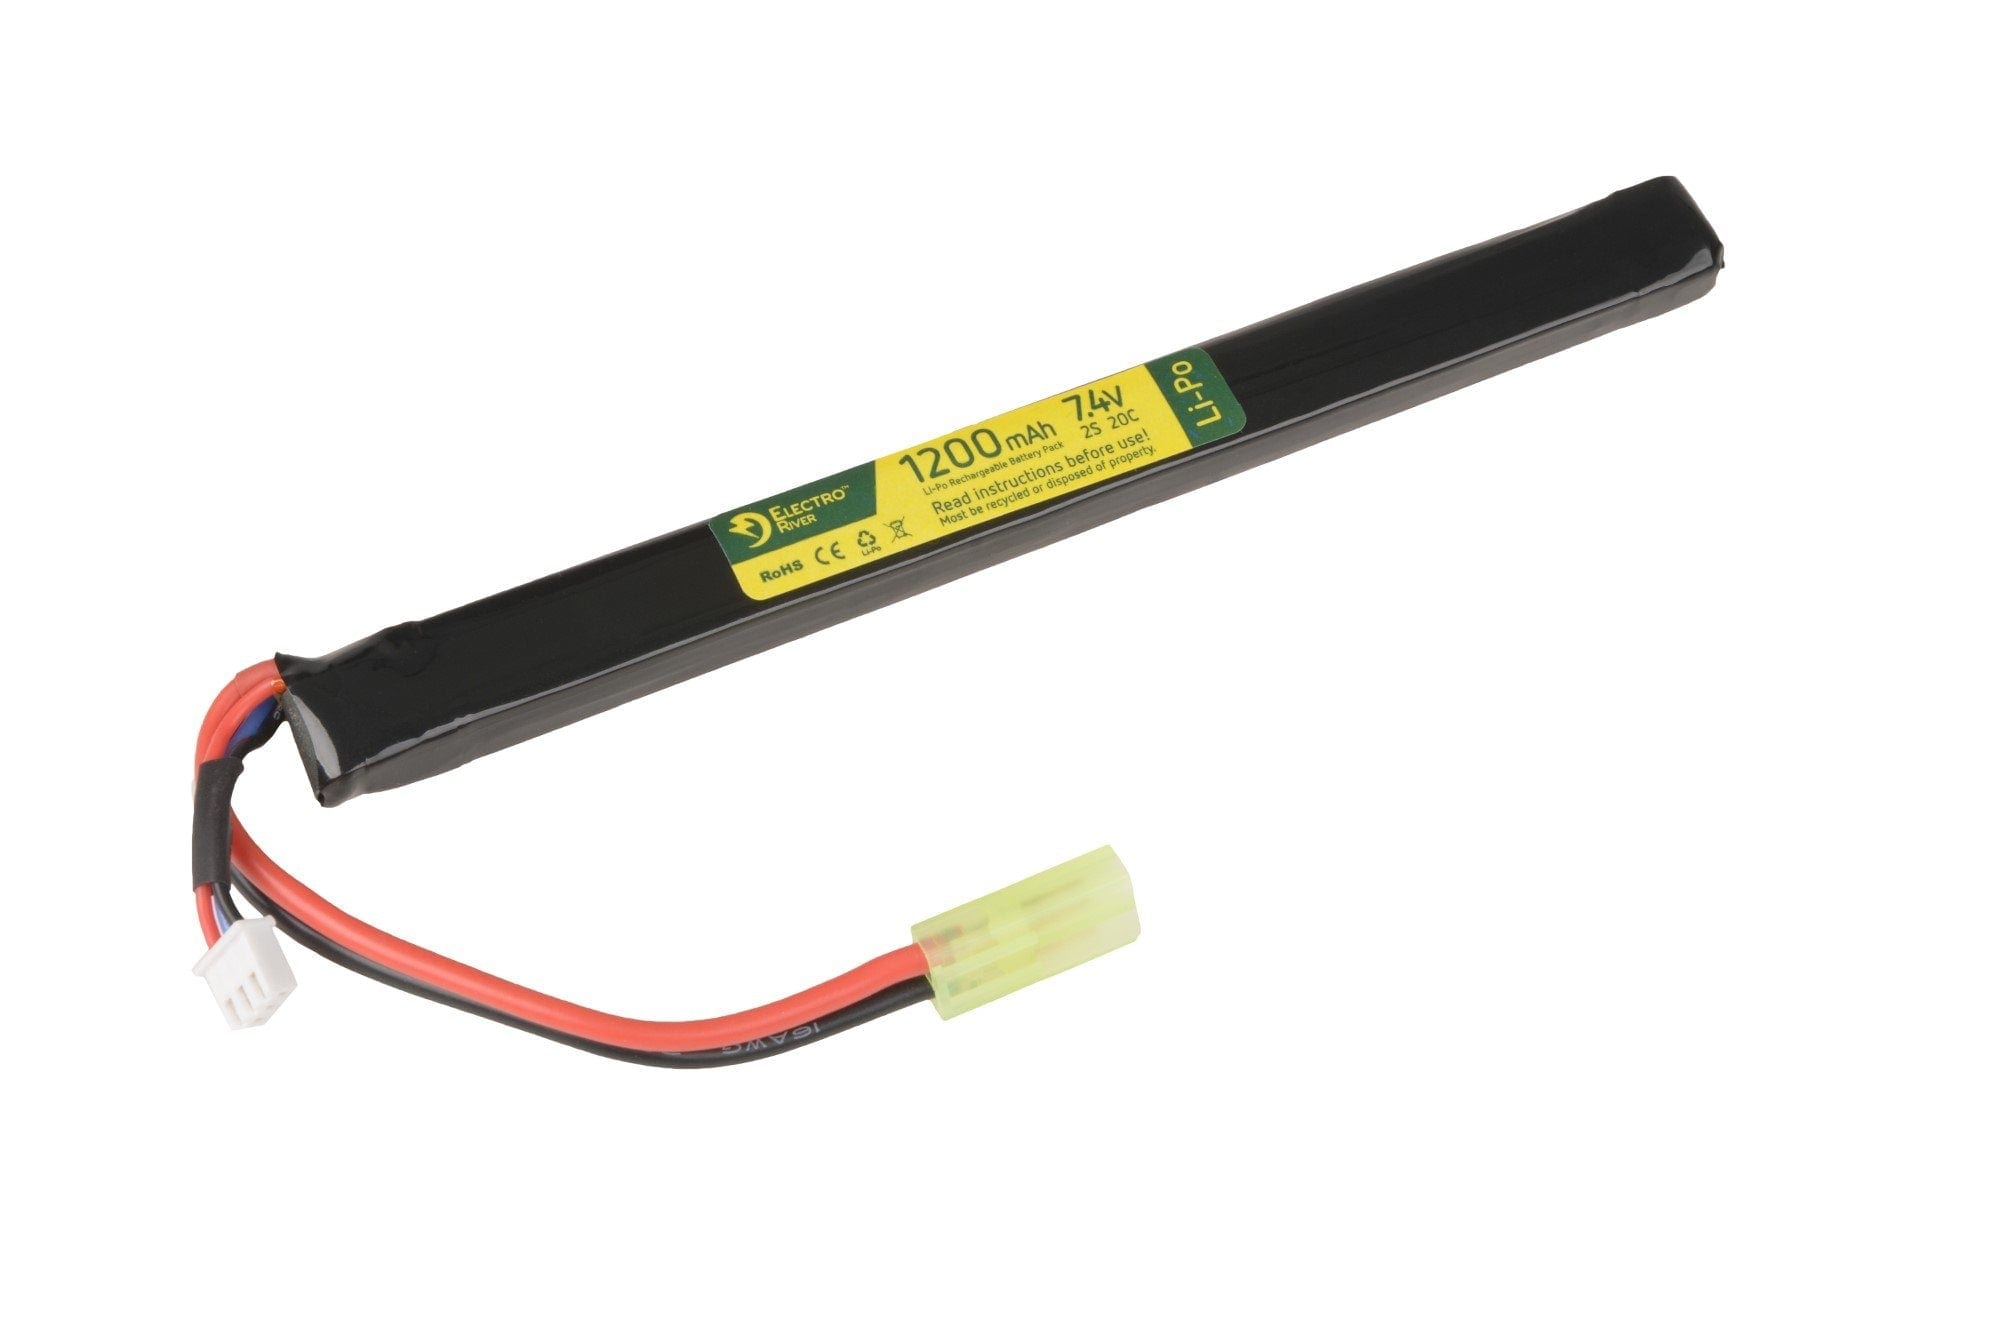 LiPo 7.4 V 1200mAh 20/40C Battery - Under AK Dust Cover by Electro River on Airsoft Mania Europe